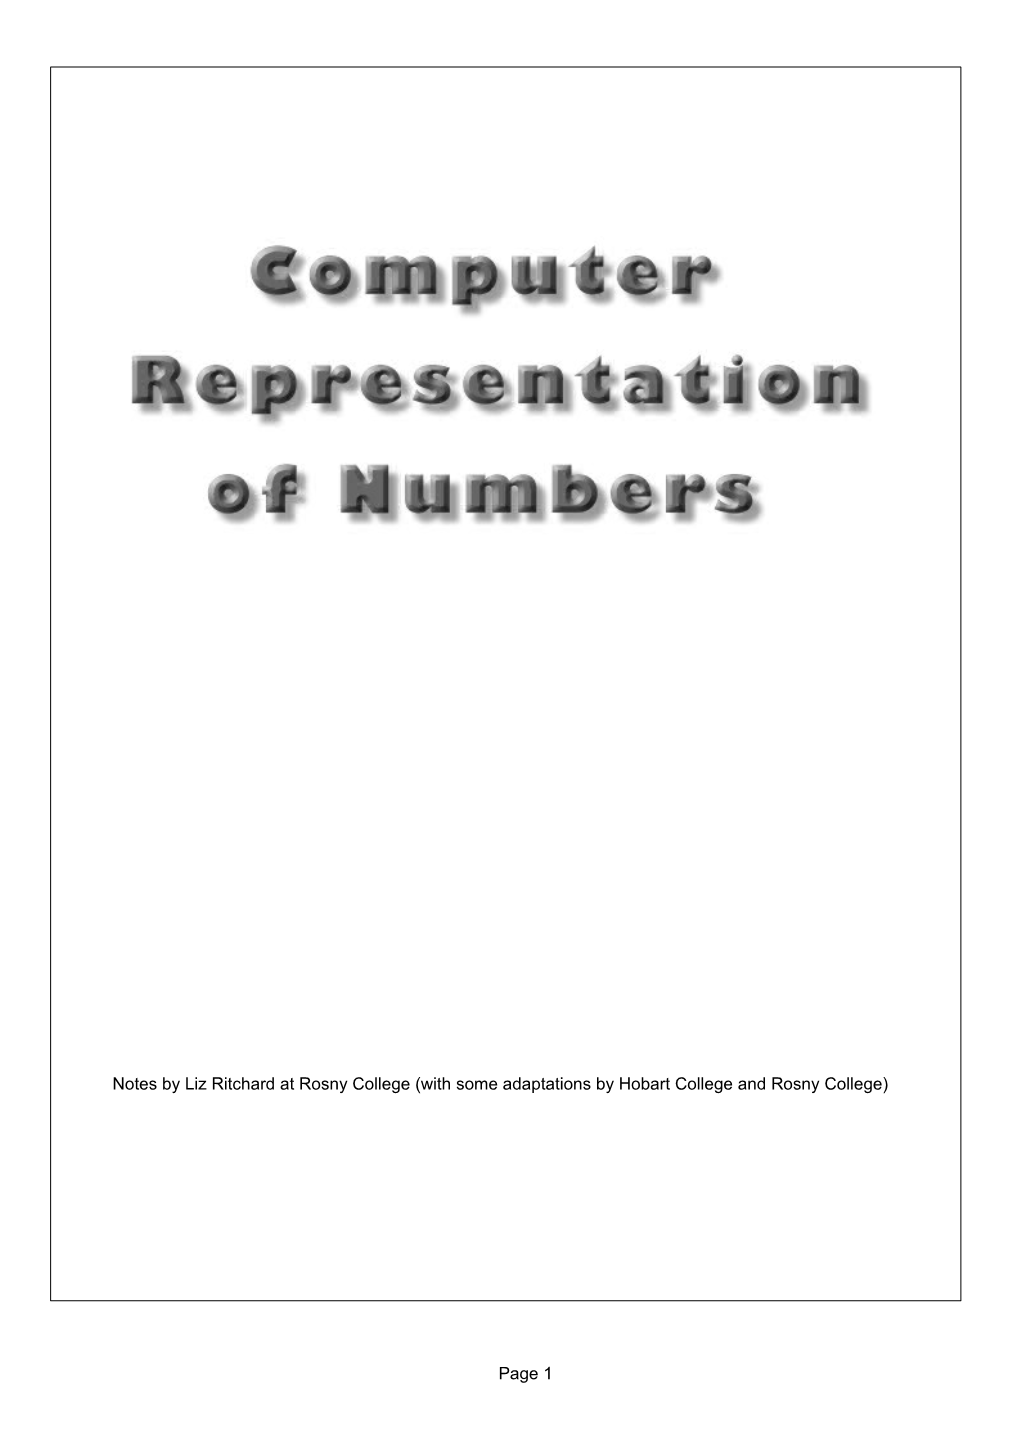 Computer Representation of Numbers